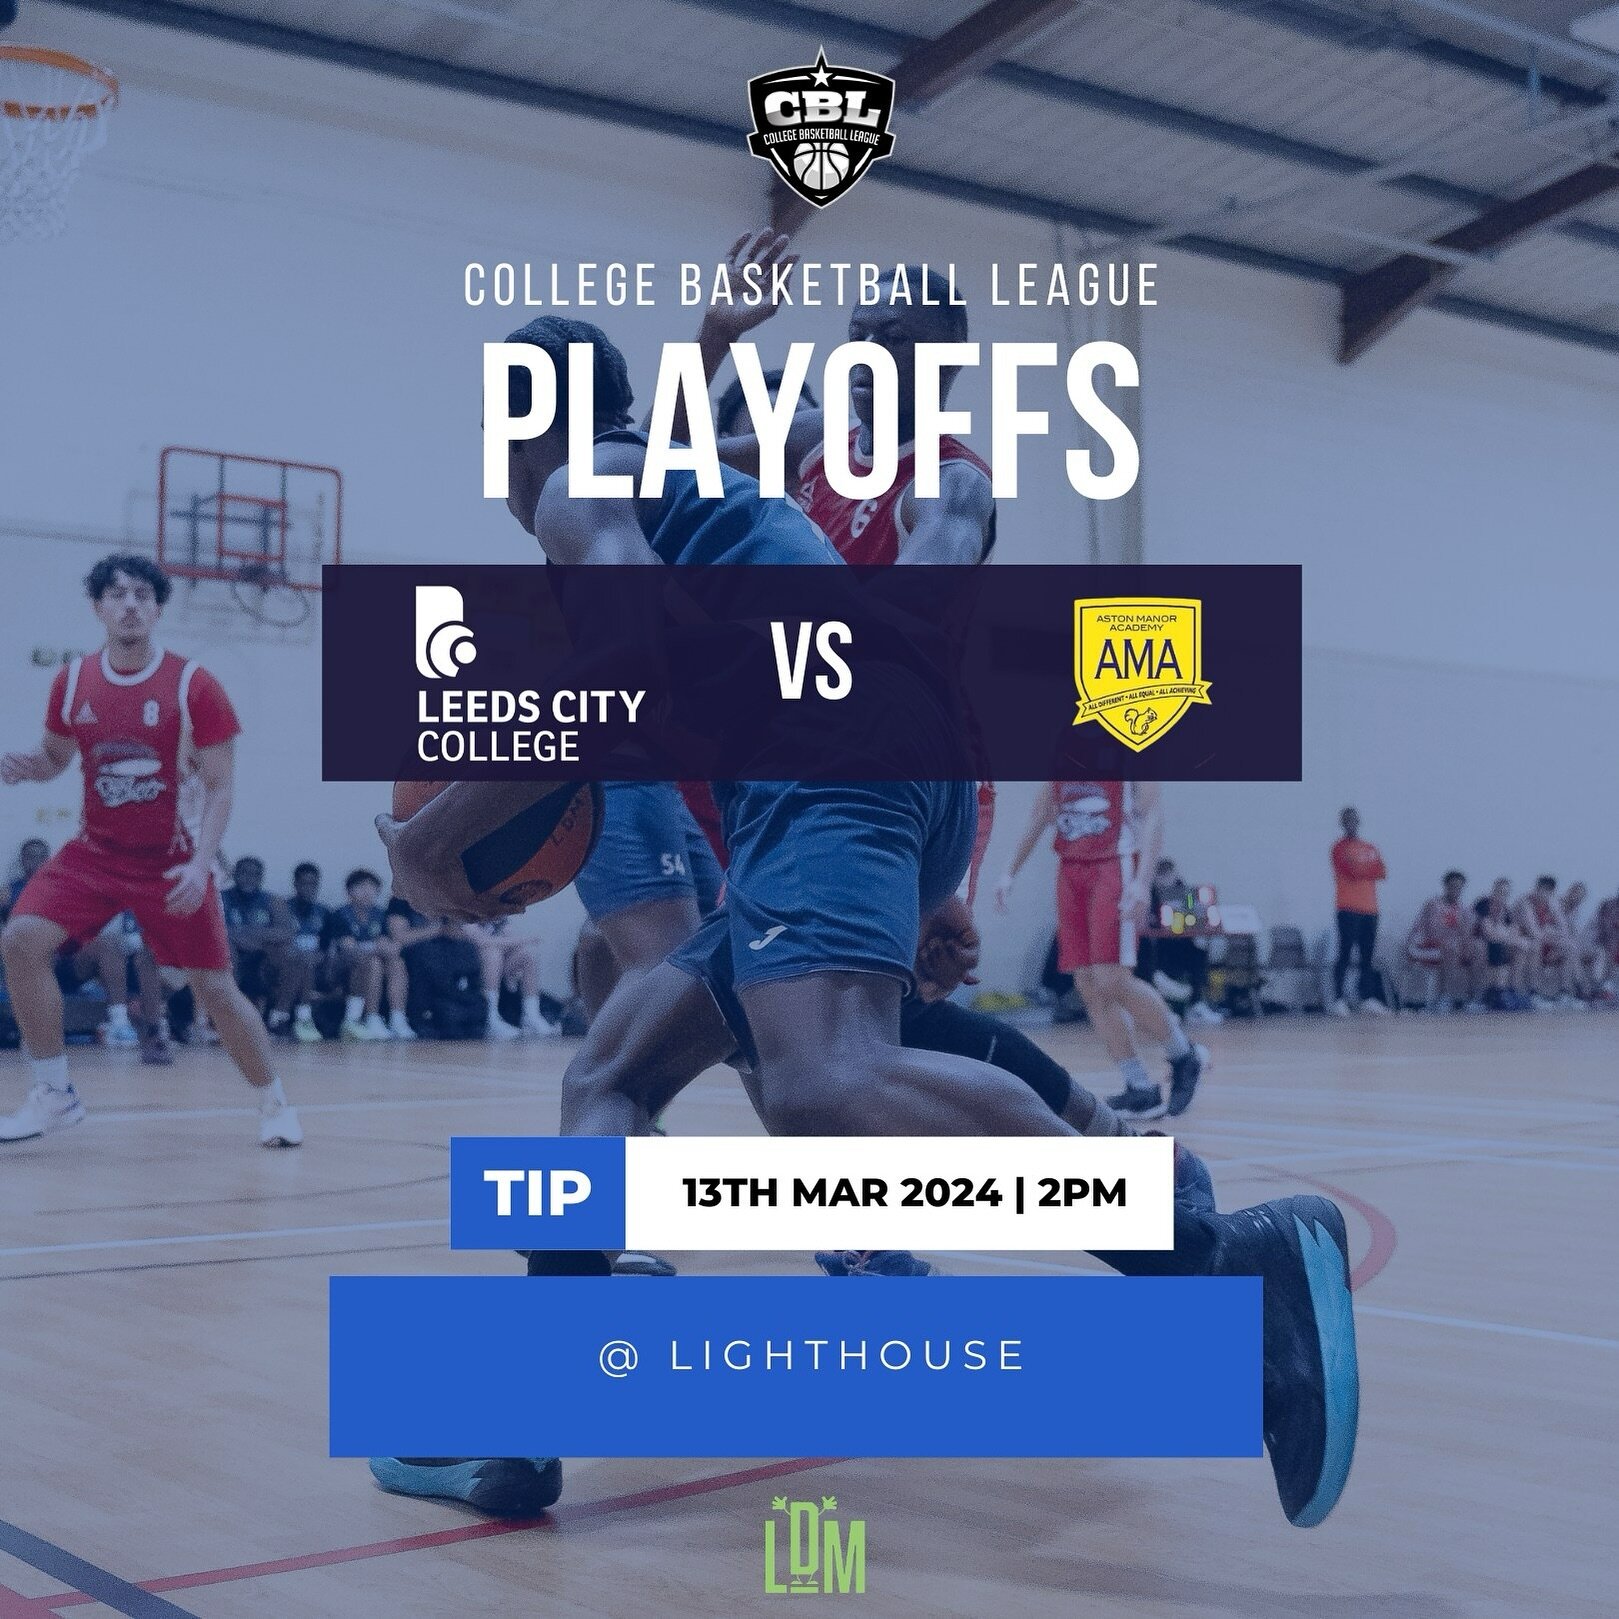 Playoffs‼️
LCC has secured a spot in the playoffs after a victory against Queen Ethelburga&rsquo;s. It was an intense battle for this opportunity, and our boys showed incredible focus and heart. 

Now, they&rsquo;re gearing up to face Aston Maner on 